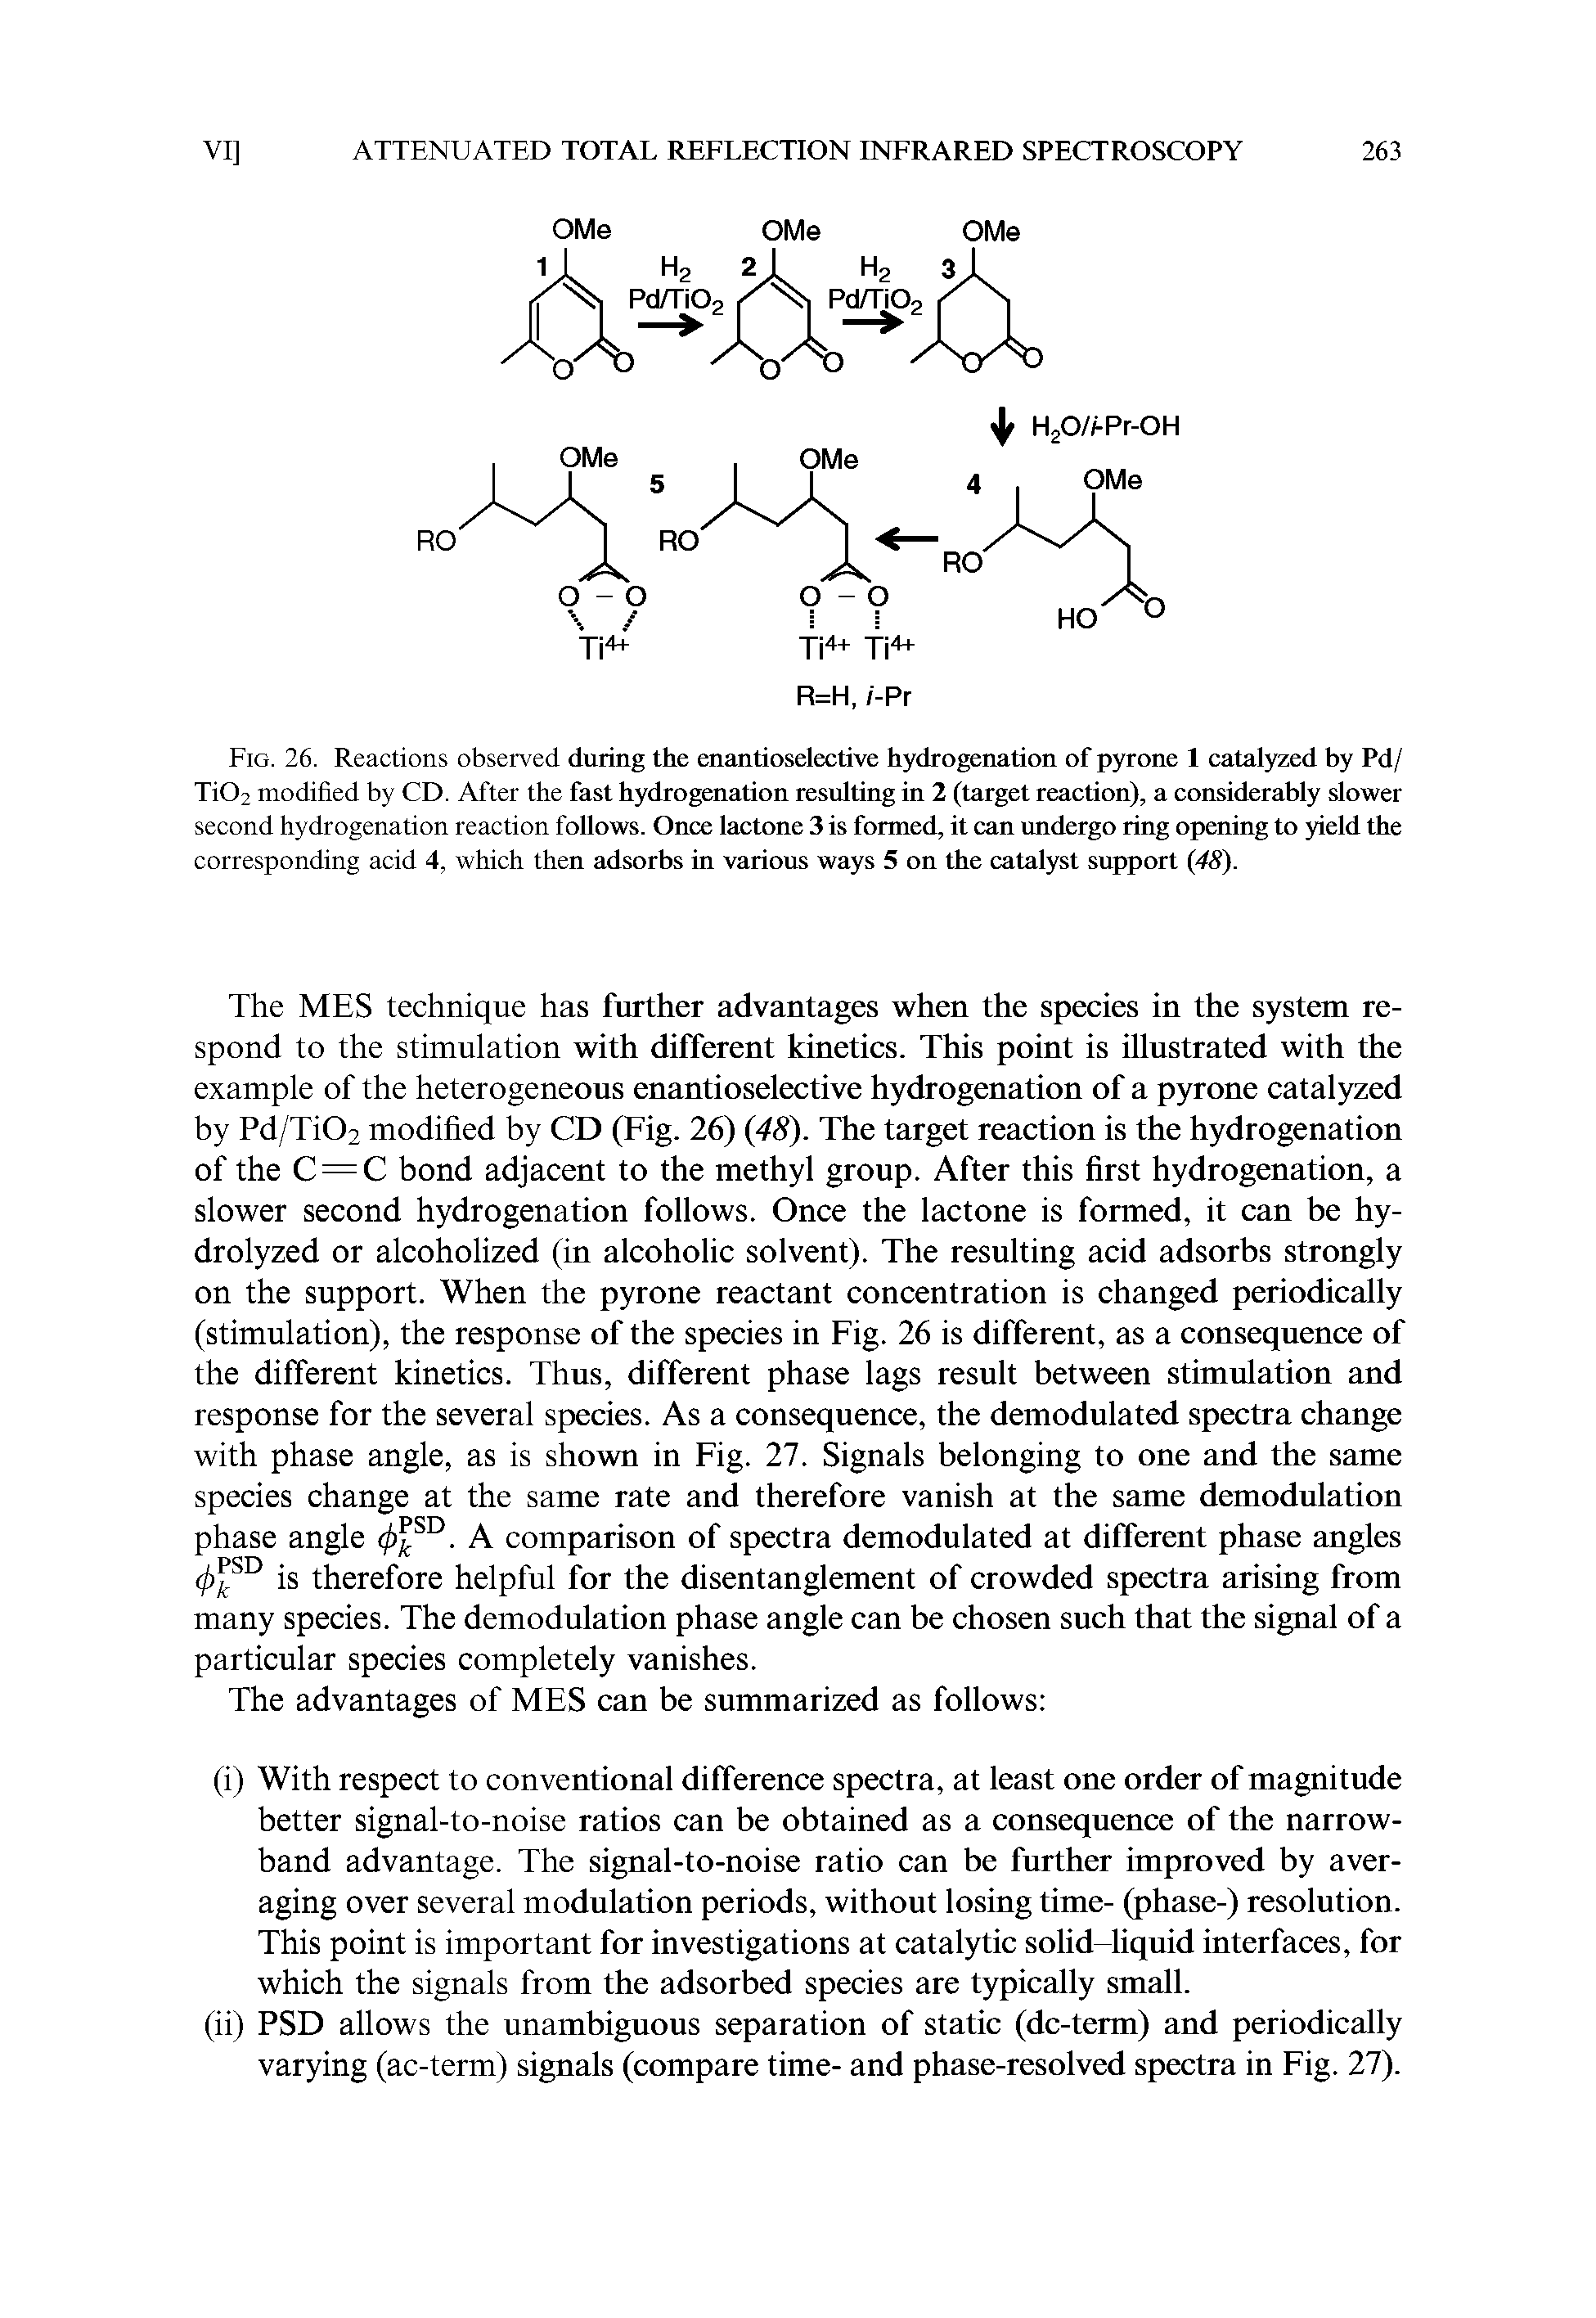 Fig. 26. Reactions observed during the enantioselective hydrogenation of pyrone 1 catalyzed by Pd/ TiO2 modified by CD. After the fast hydrogenation resulting in 2 (target reaction), a considerably slower second hydrogenation reaction follows. Once lactone 3 is formed, it can undergo ring opening to yield the corresponding acid 4, which then adsorbs in various ways 5 on the catalyst support (48).